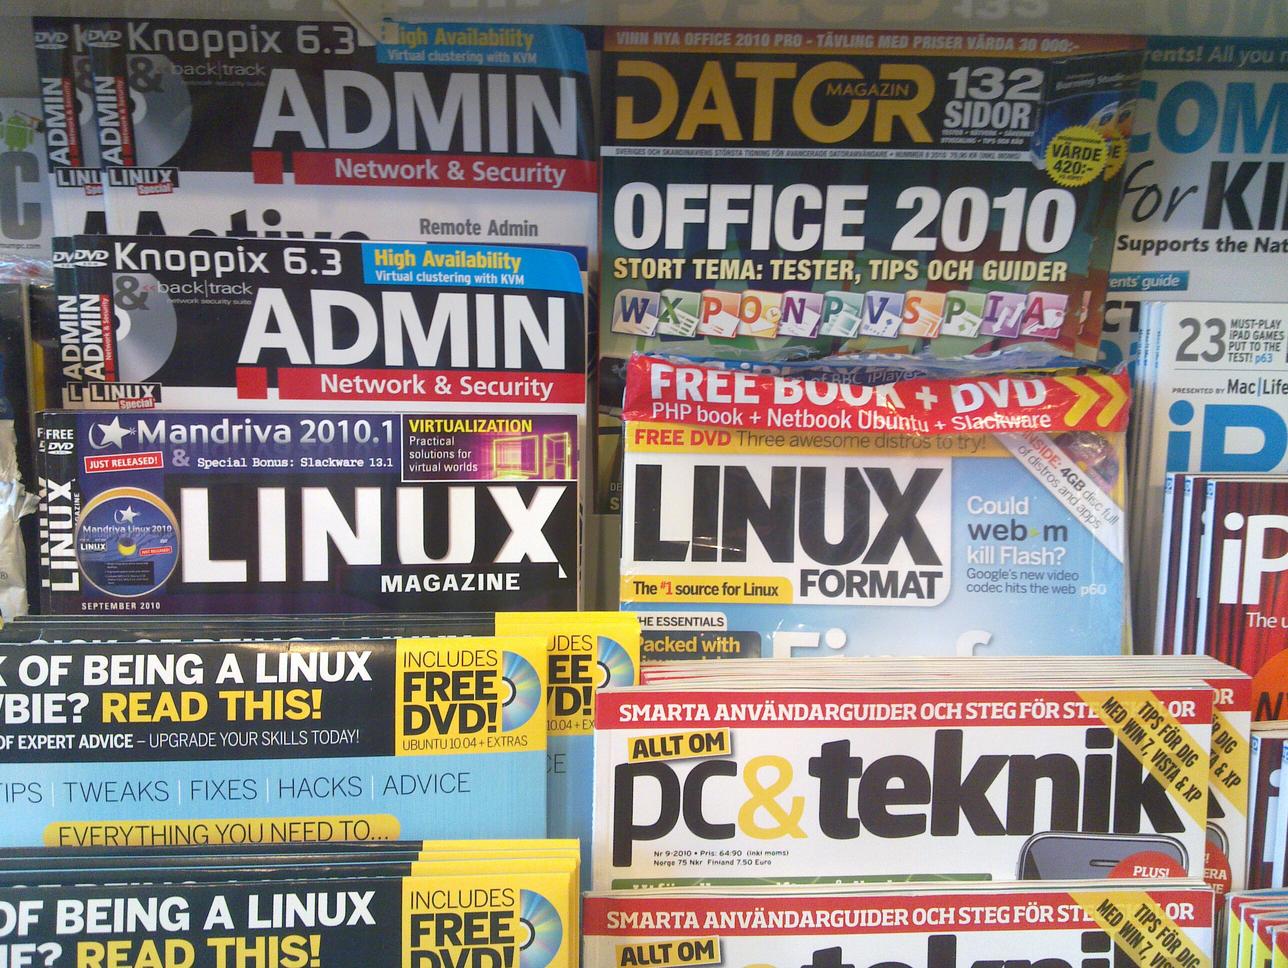 Hidden away, there is a magazine for Office 2010